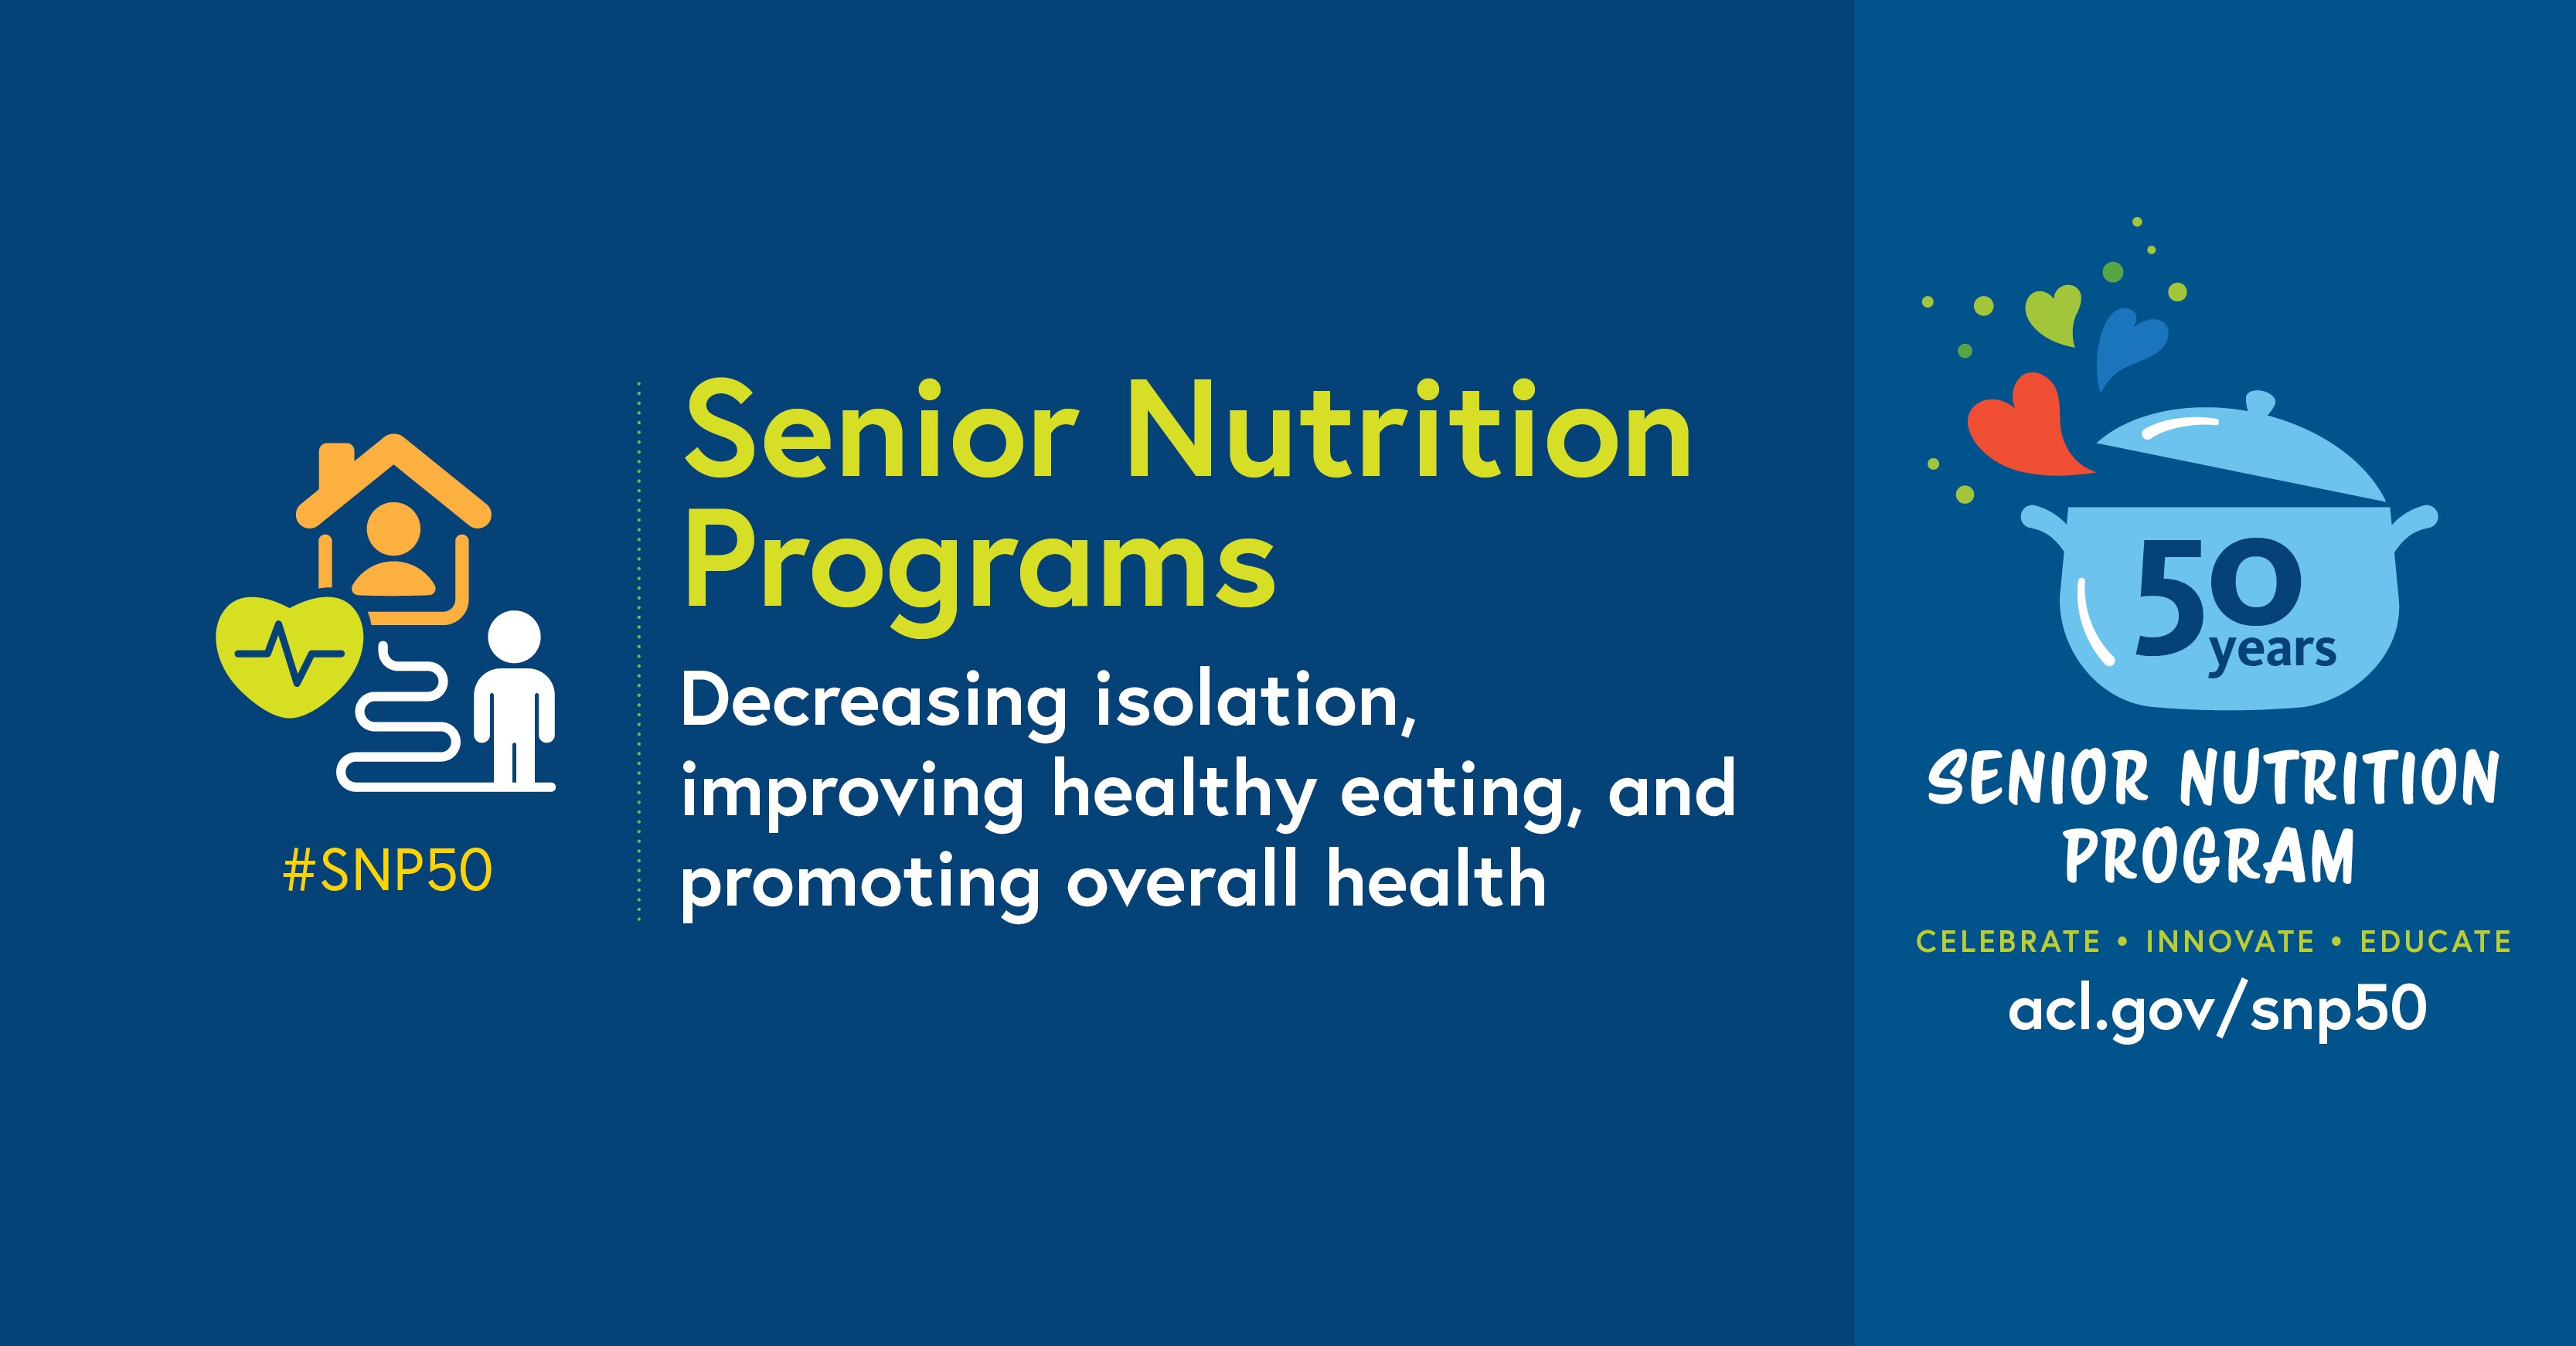 Social Graphic: Senior nutrition Programs decreasing isolation, improving healthy eating, and promoting overall health. 50 years. Senior Nutrition Program. Celebrate. Innovate. Educate. acl.gov/snp50 #SNP50